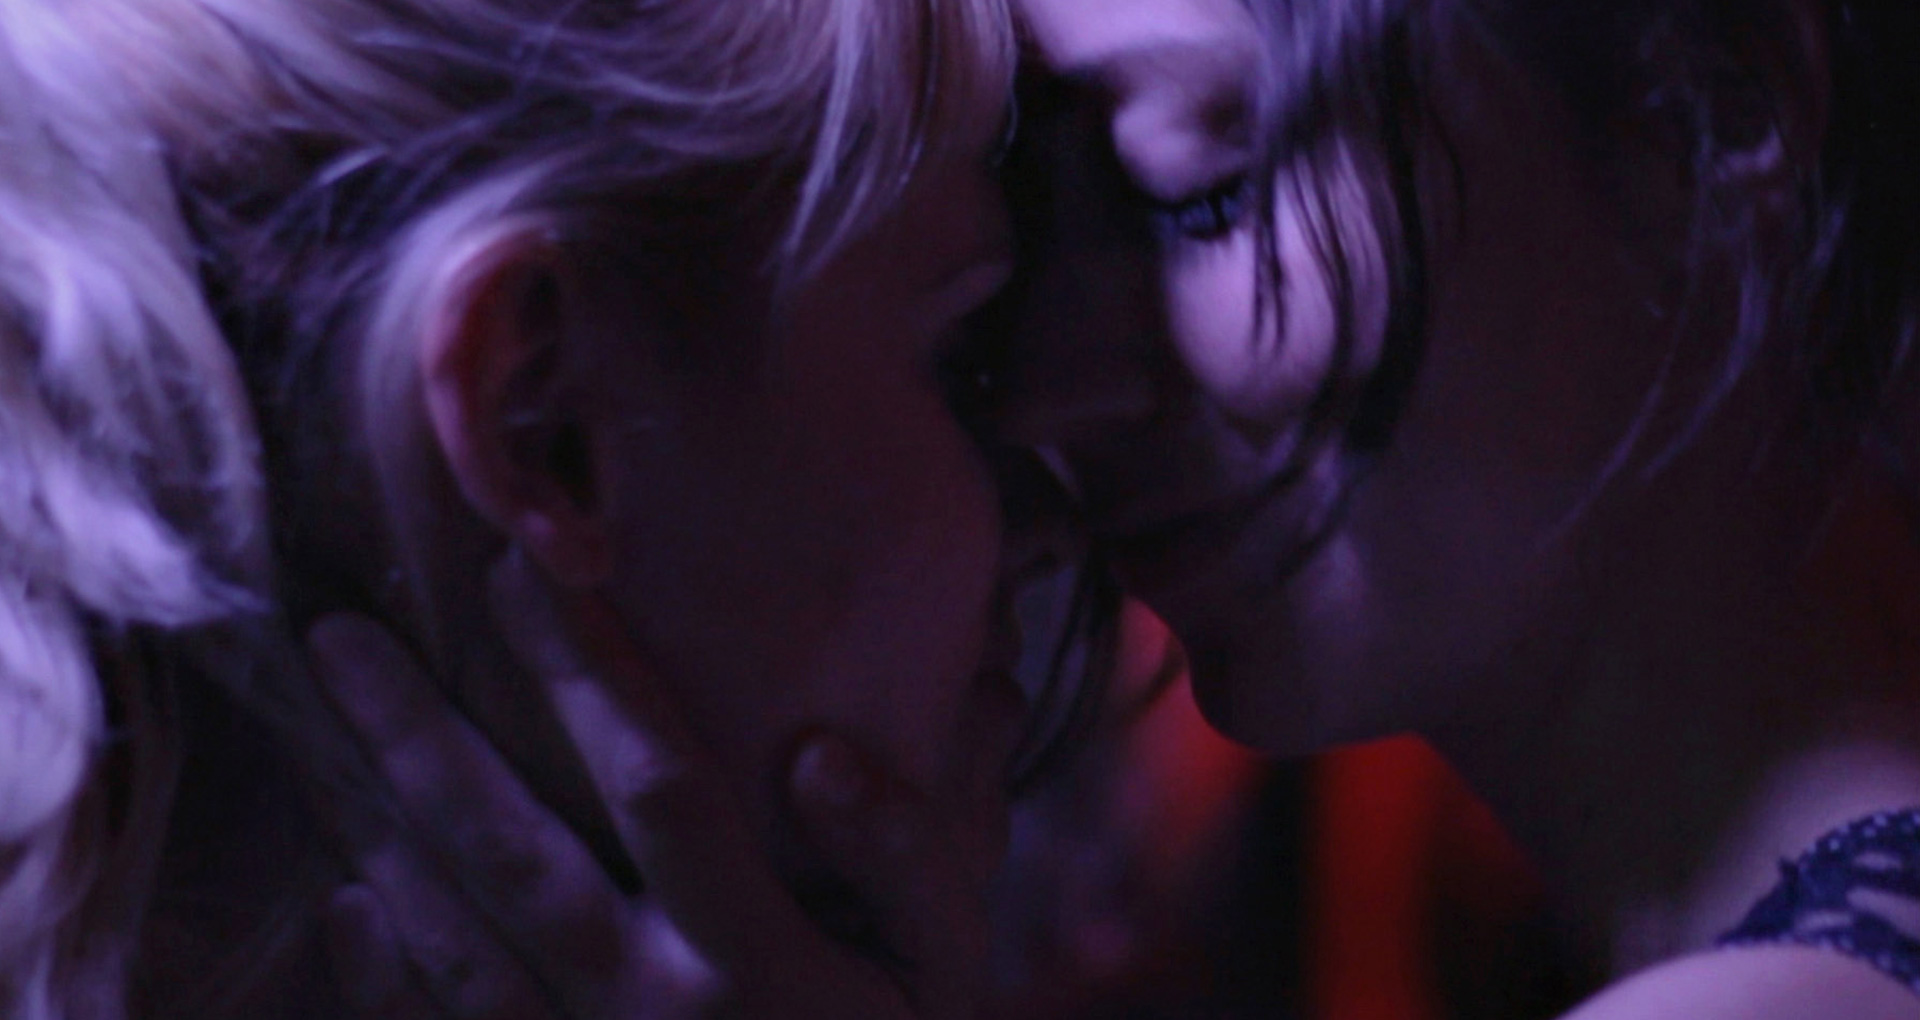 maja and anna dance intimate at a club